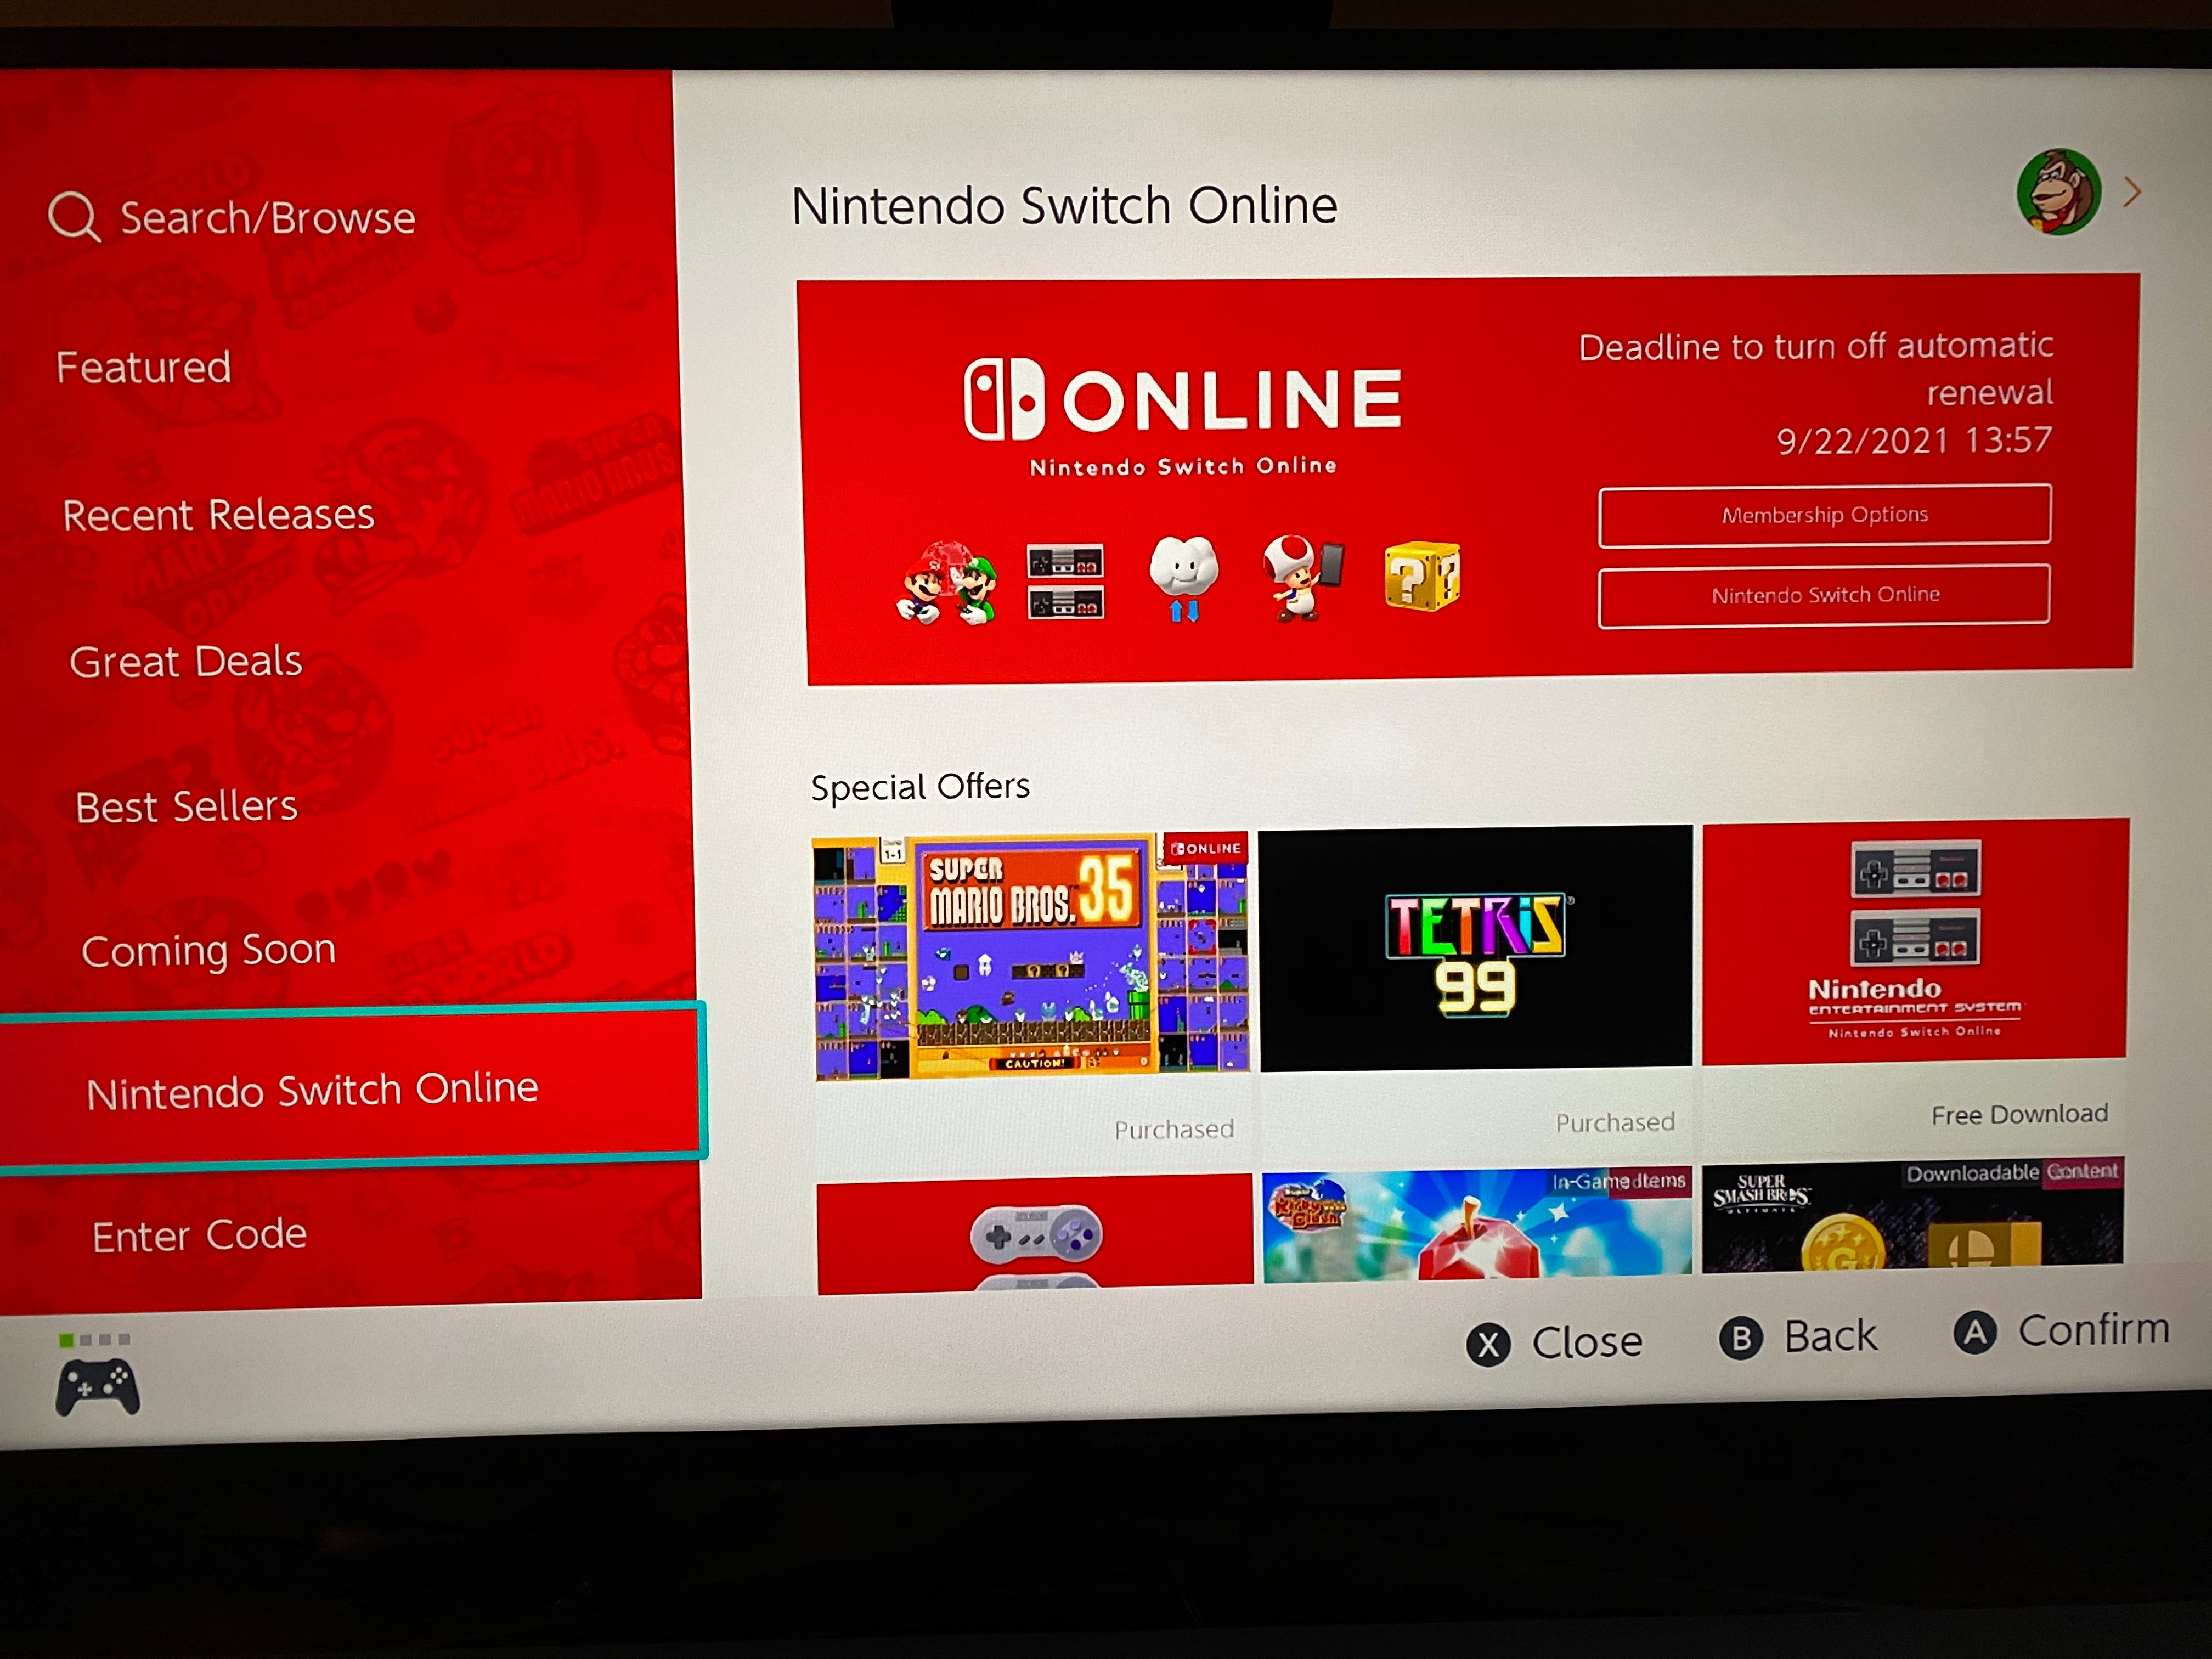 Switch Online Membership Options